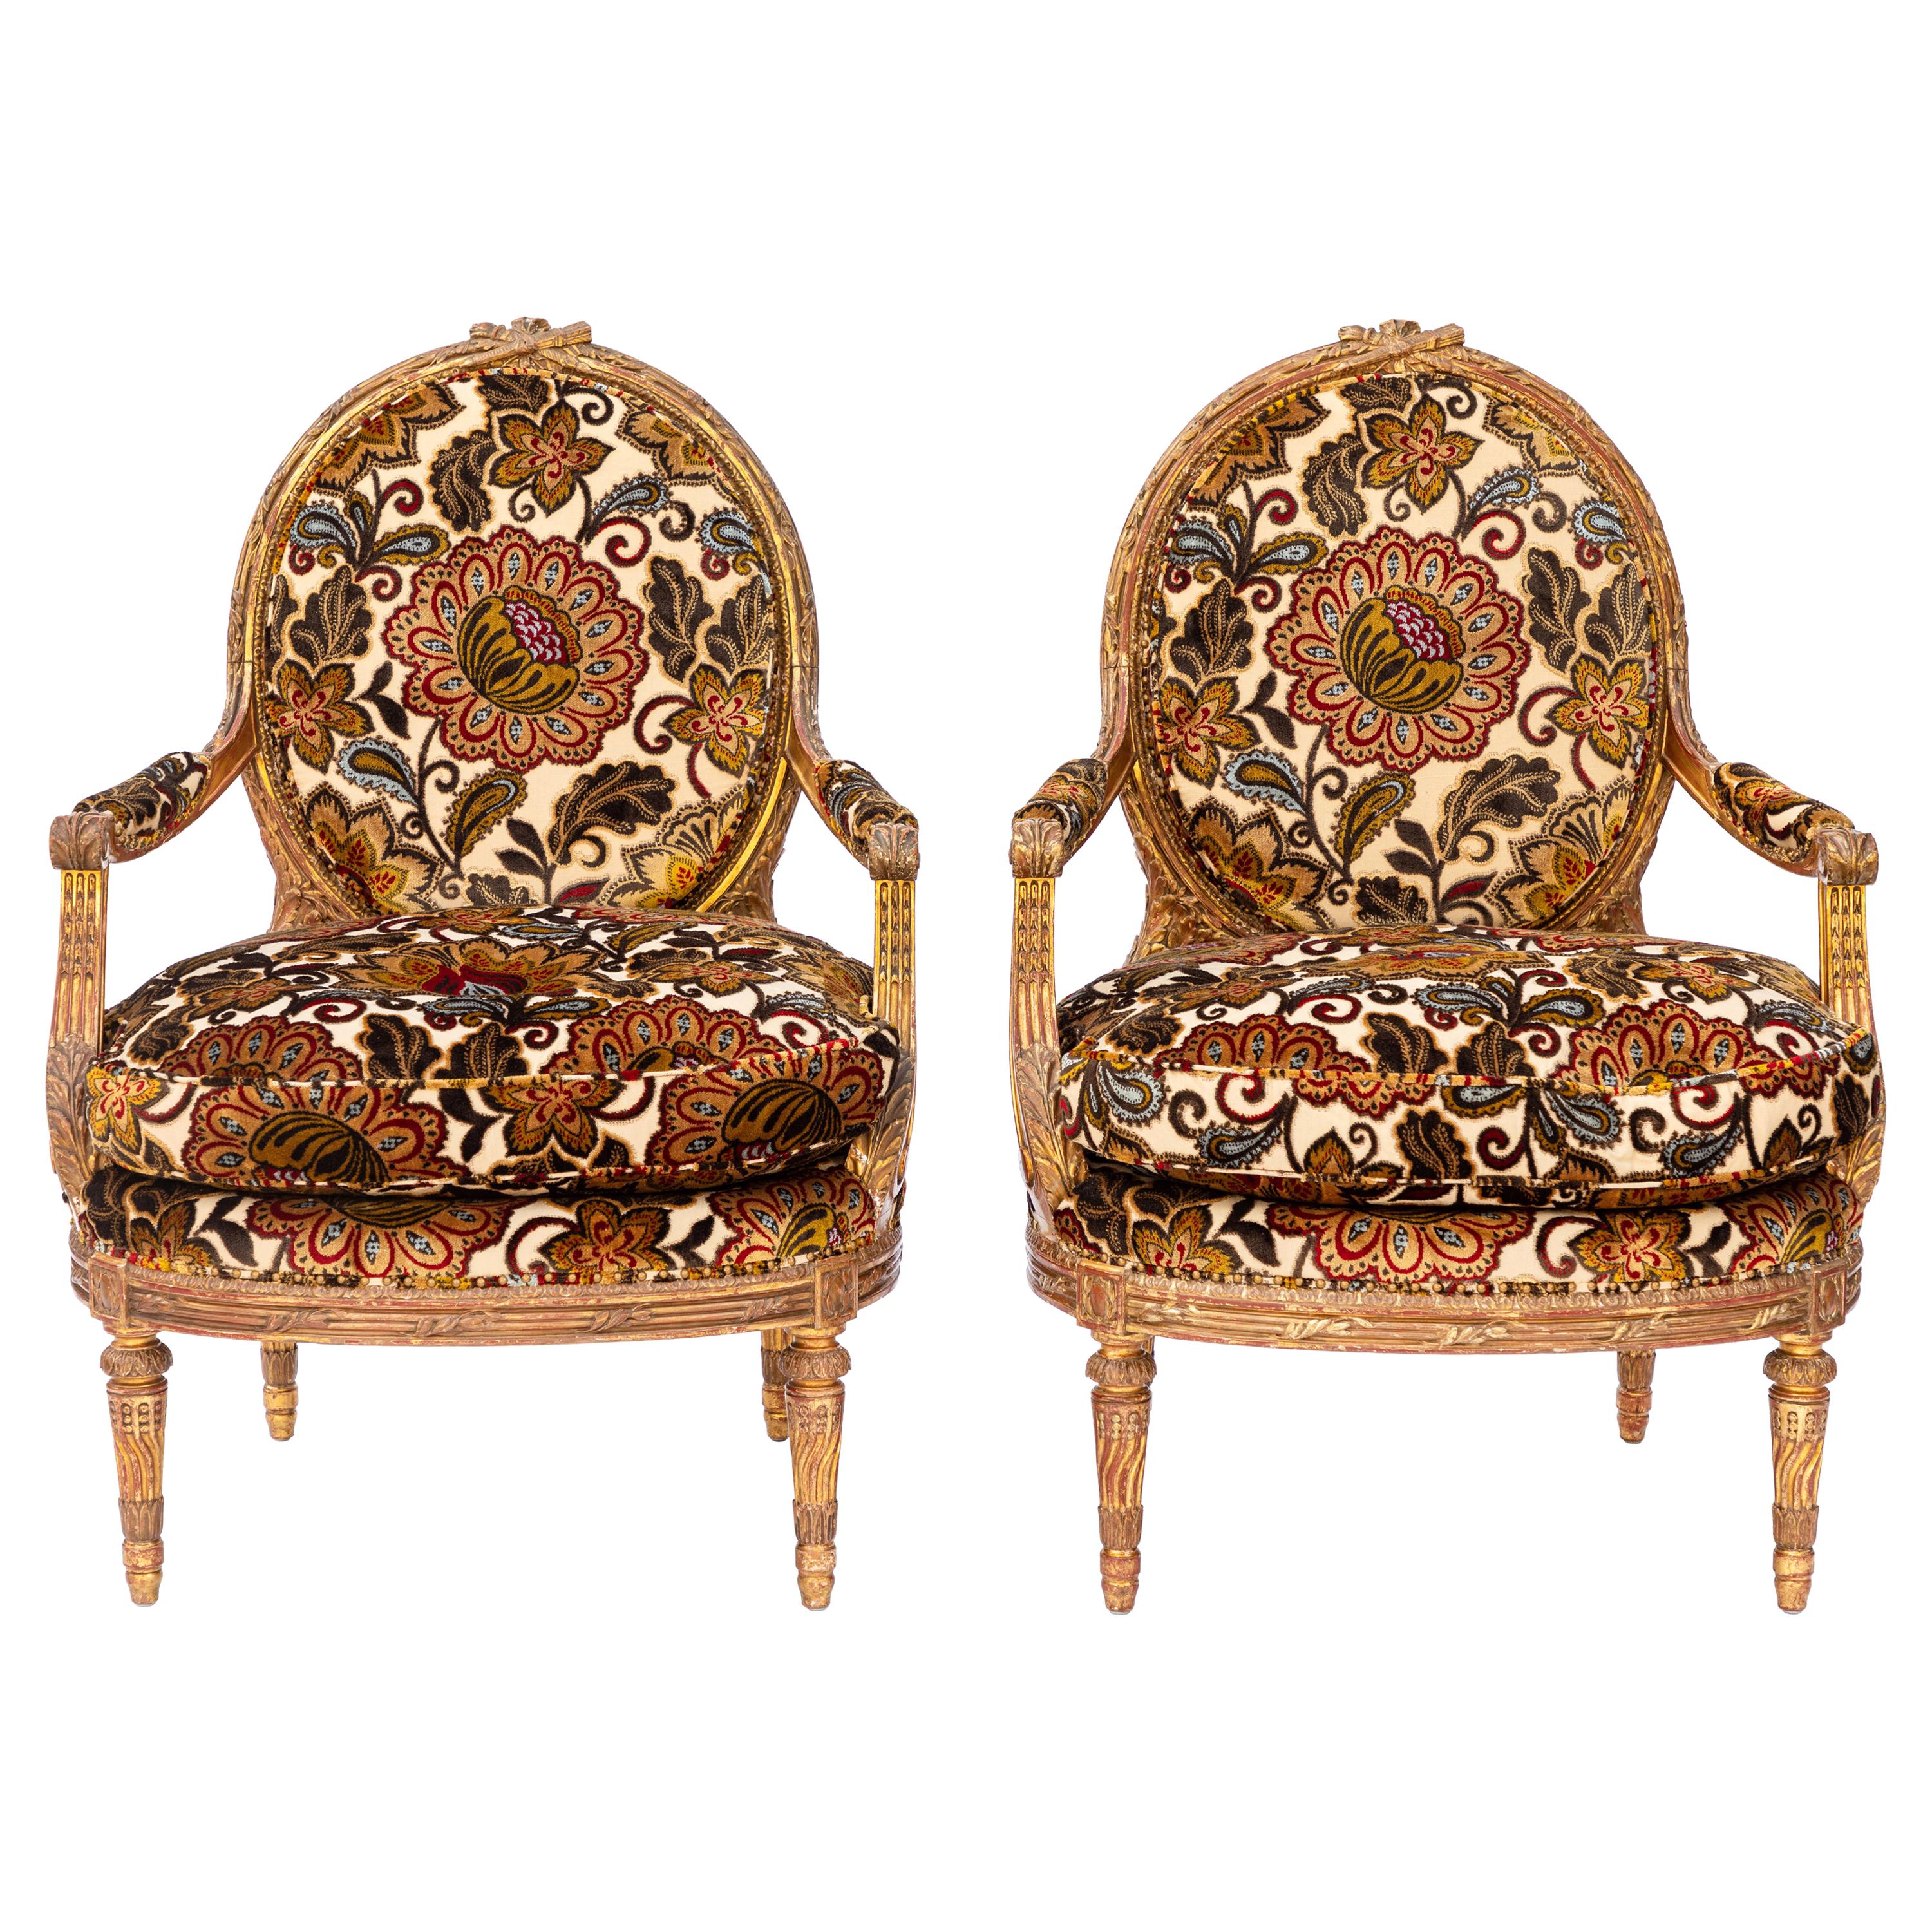 Pair of 19th Century French Carved Giltwood Armchairs